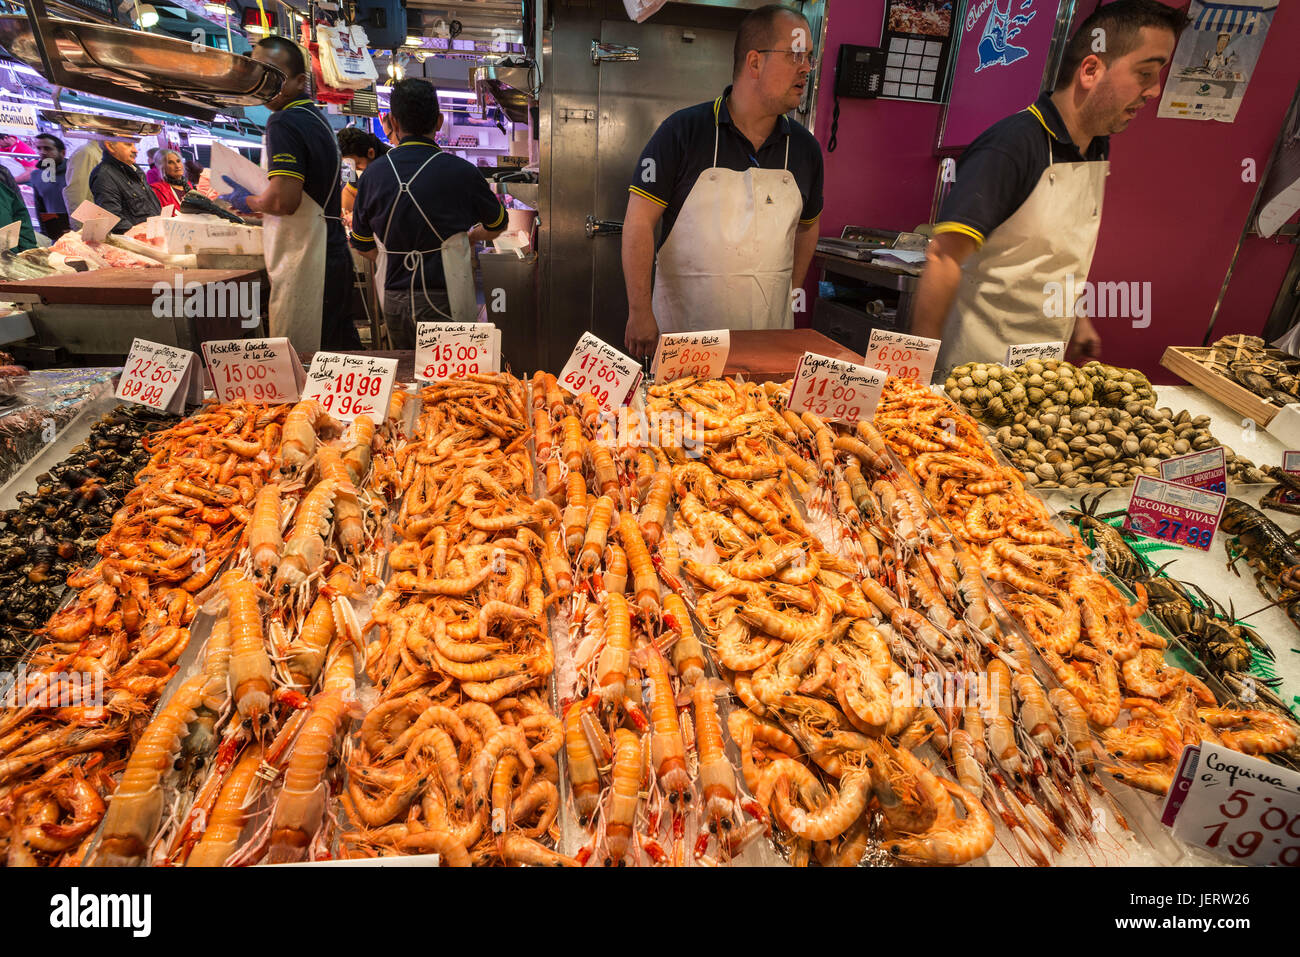 Seafood from all over Spain on sale in the Mercardo de Maravillas, one of the largest food markets in Europe.  Cuatro Caminos, Madrid, Spain Stock Photo